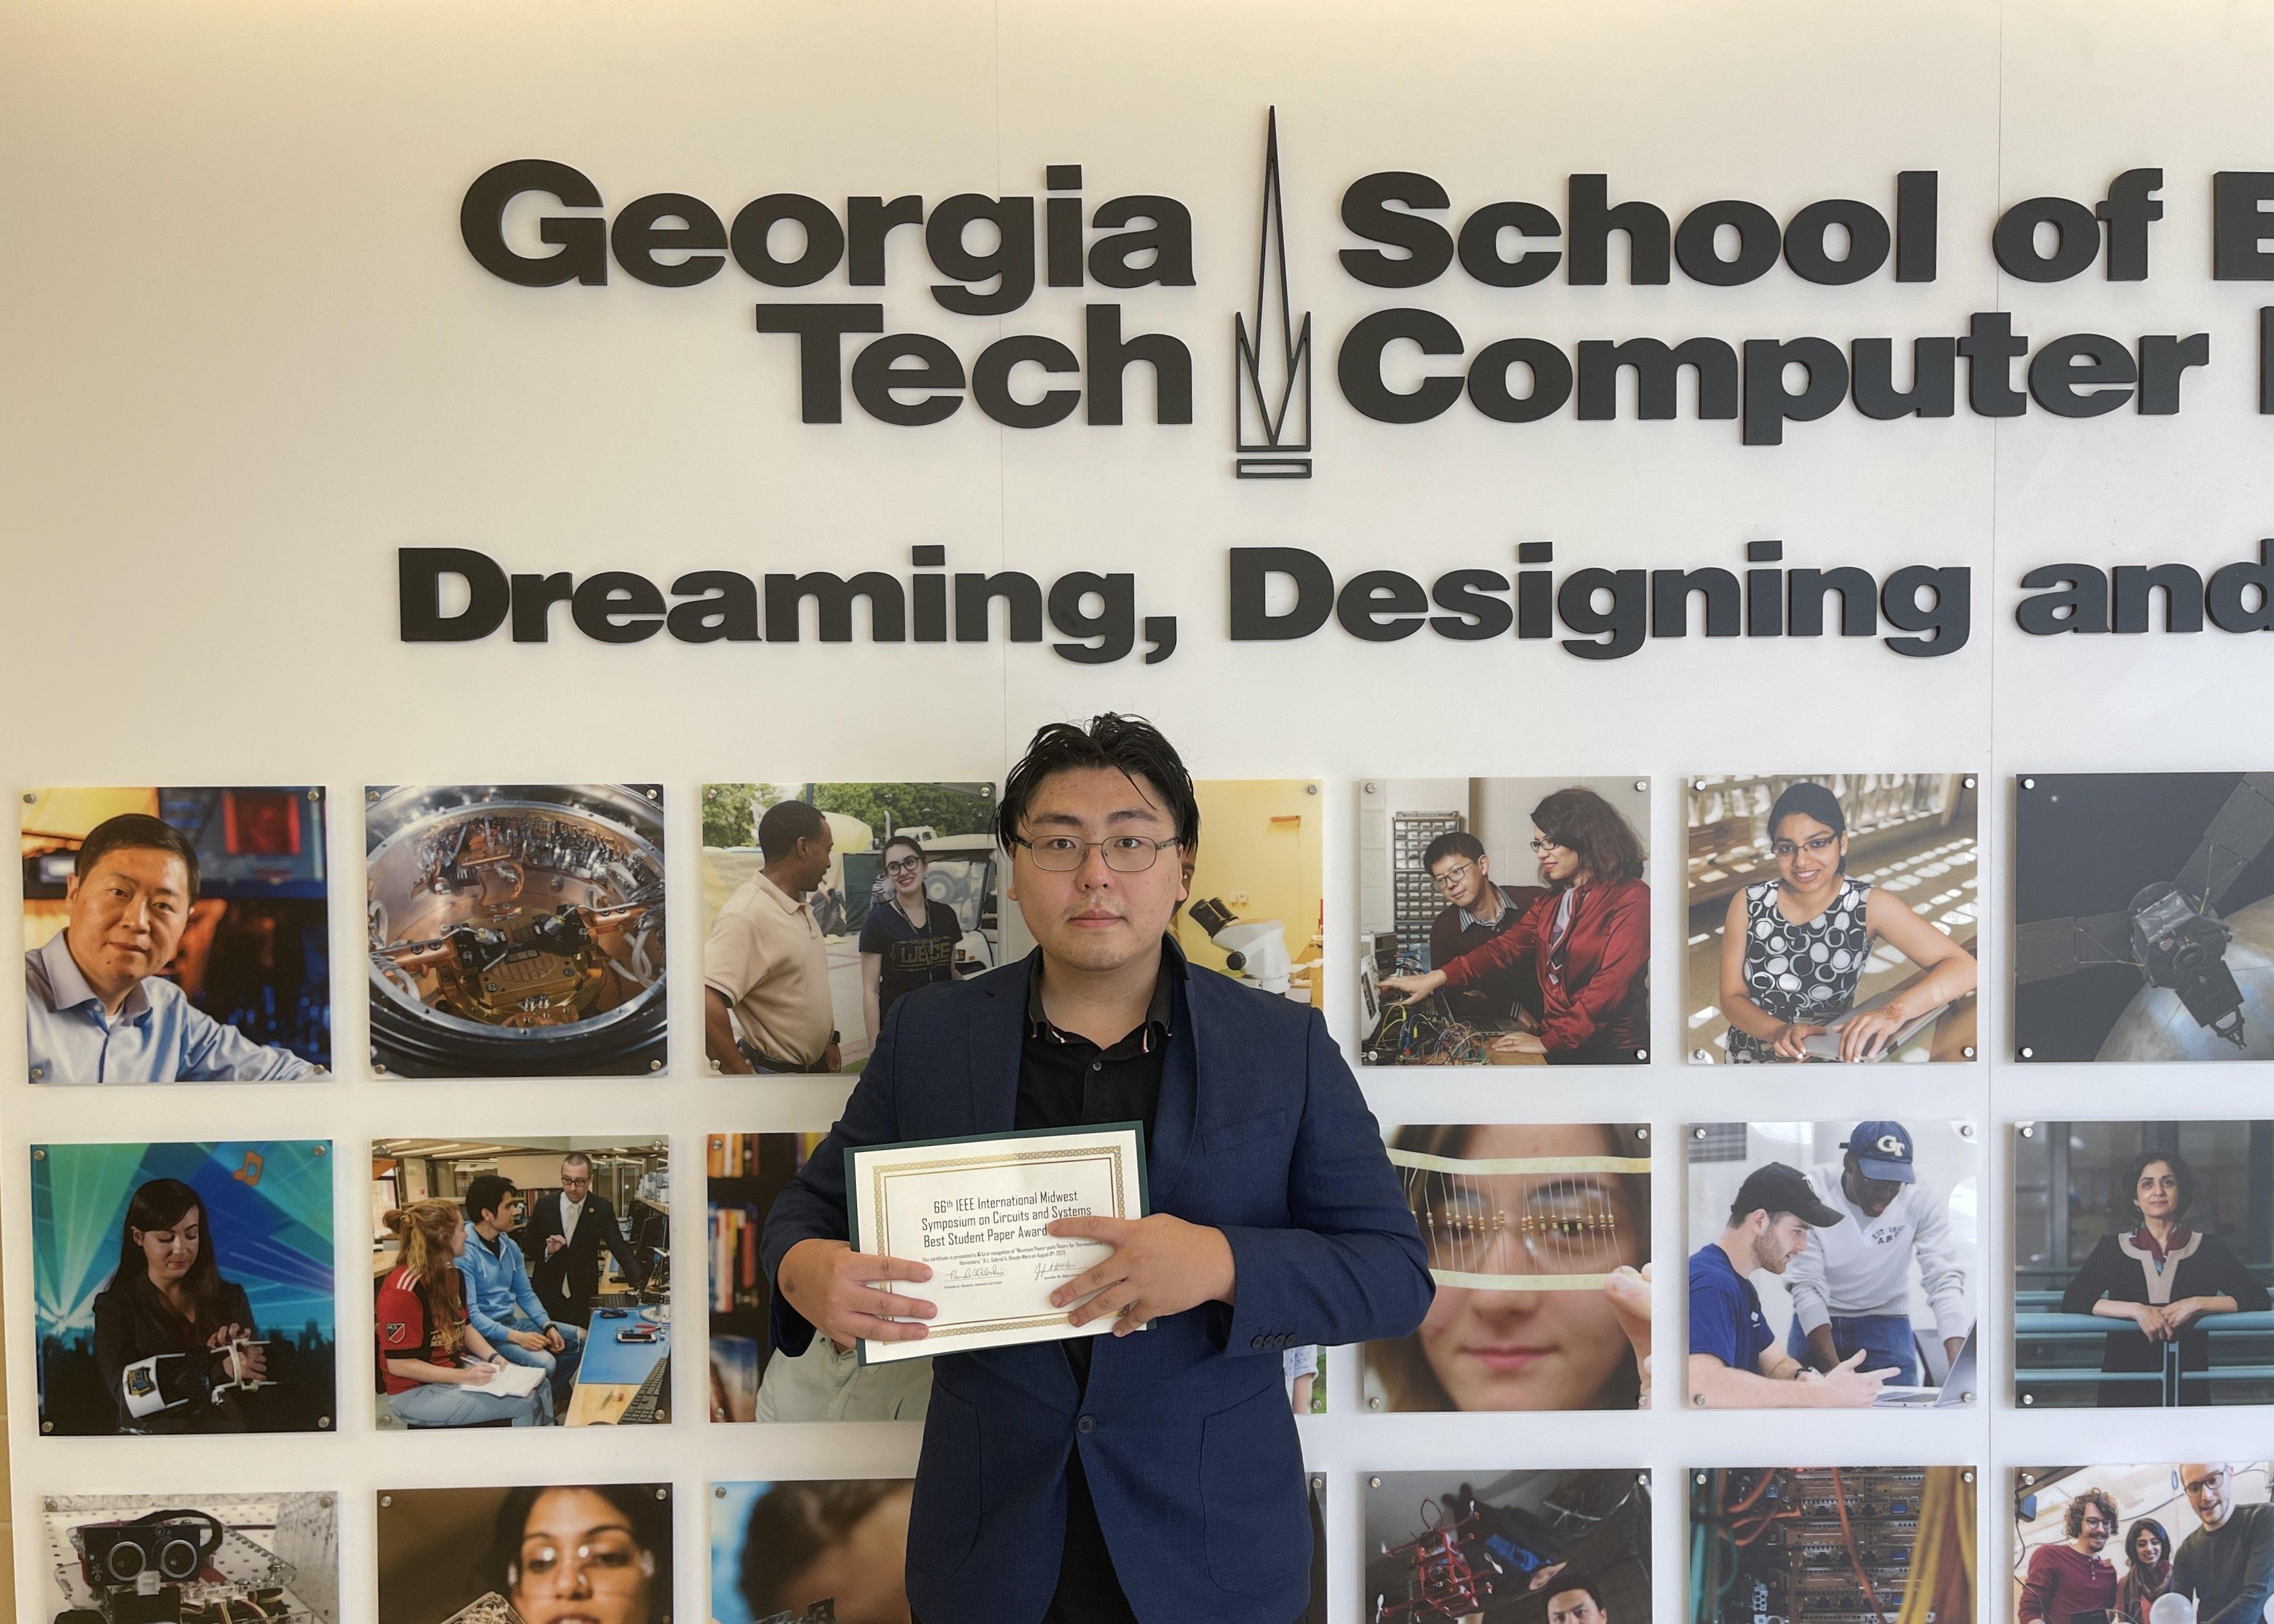 Xi Li, a Ph.D. candidate in the Georgia Tech School of Electrical and Computer Engineering